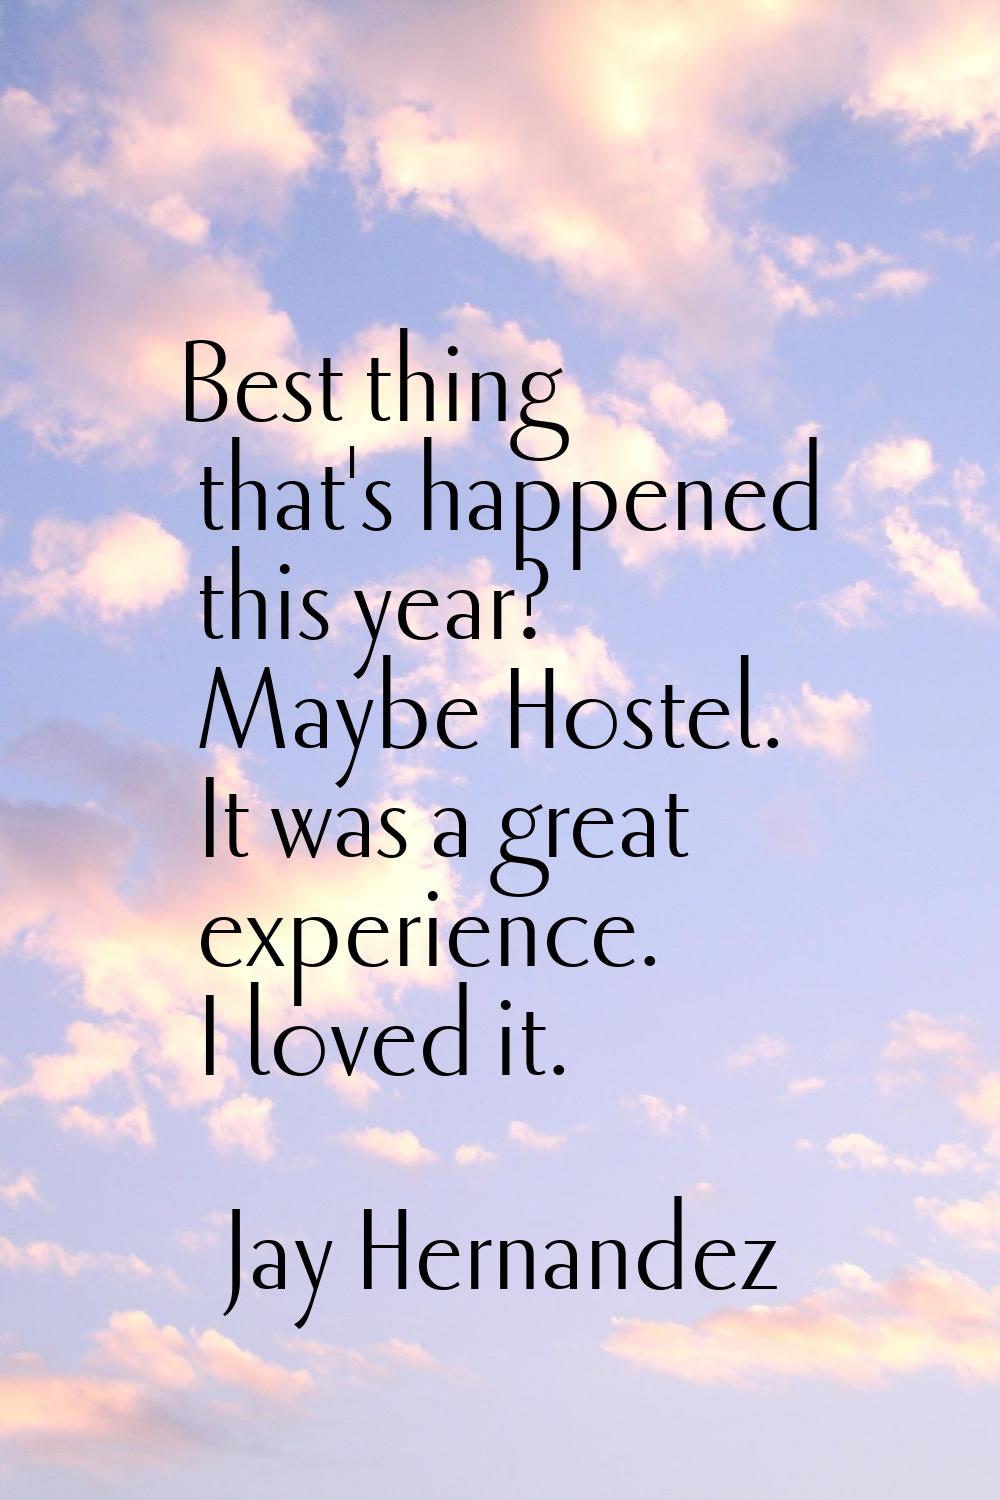 Best thing that's happened this year? Maybe Hostel. It was a great experience. I loved it.